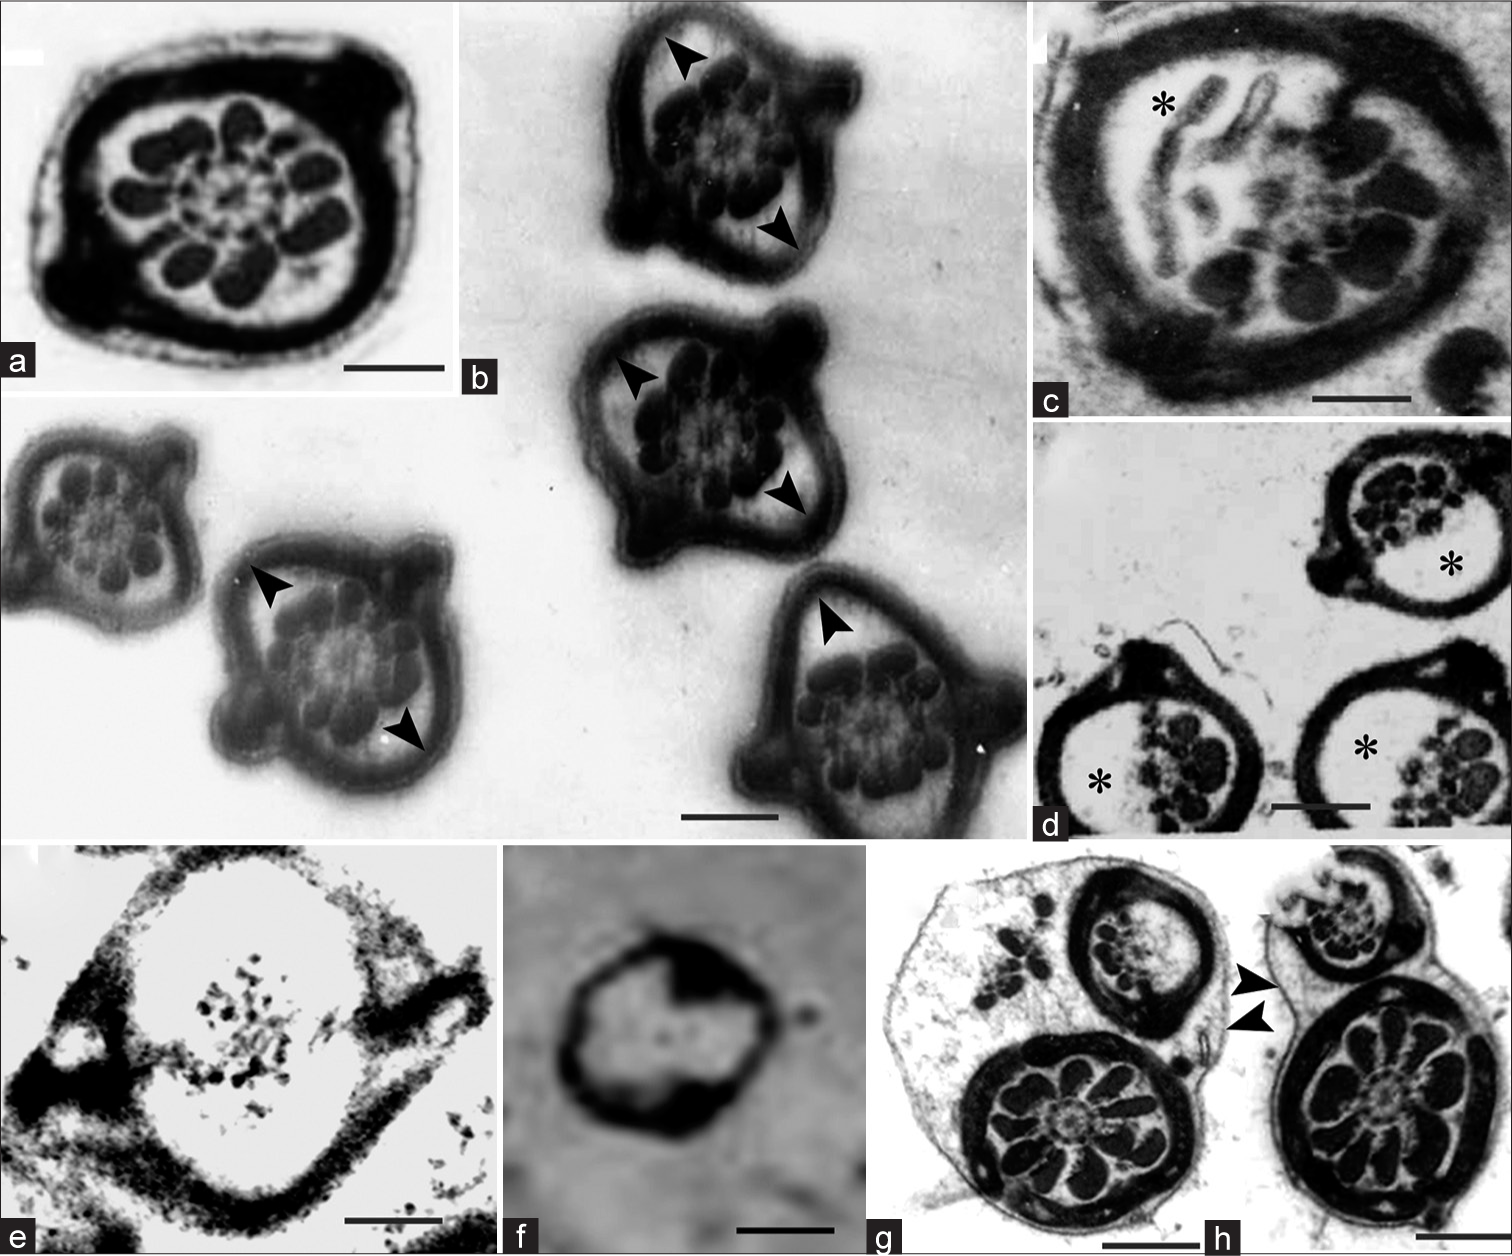 (a) Transmission electron micrograph (TEM) of Transverse section (TS) of principal piece of control sperm. (b–h) TEM of TS of principal piece of flagellum of matrix-embedded spermatozoa in disintegration. (b) fibrous sheath (FS) is lifted off (arrowheads) from the axoneme-outer dense fiber (ODF) complex; (c) one such spermatozoon magnified (asterisks show disintegrating ODFs); (d) complete disintegration of the ODFs on one side (asterisks); (e) complete disintegration of the ODFs on both sides; (f) complete disintegration of the ODFs and axoneme indicating that FS is more resistant to the disintegration. (g and h) TEM of sperm flagellum, which is folded and fused, could be mistaken for matrix-embedded spermatozoa. Note the intact plasma membranes (arrowhead). Scale bar a, 0.6 μm, b, d, f–h, 0.8 μm, c, e, 0.4 μm.